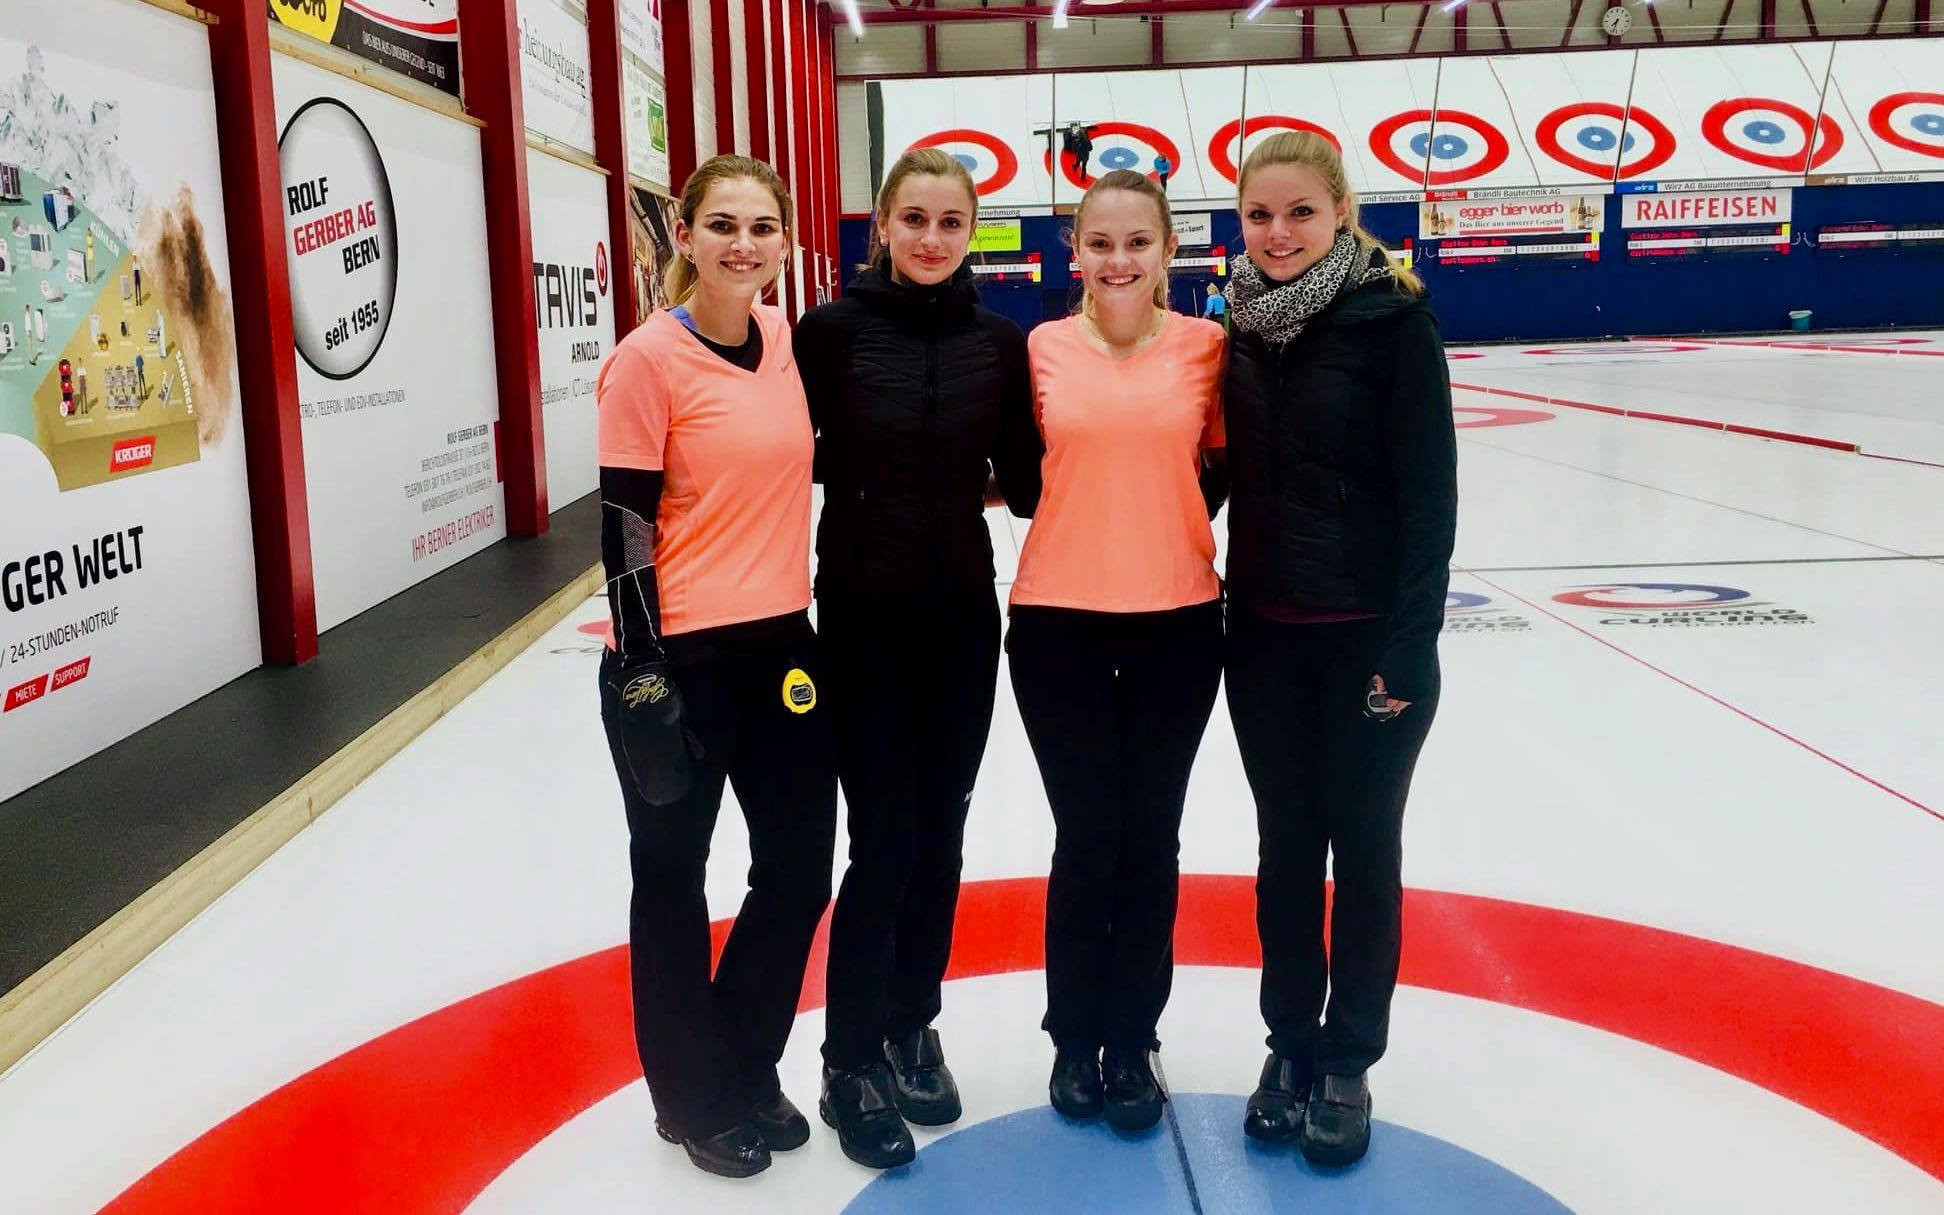 There is a lot of expectation on the Swiss women's curling team ©Swiss University Sports/Facebook